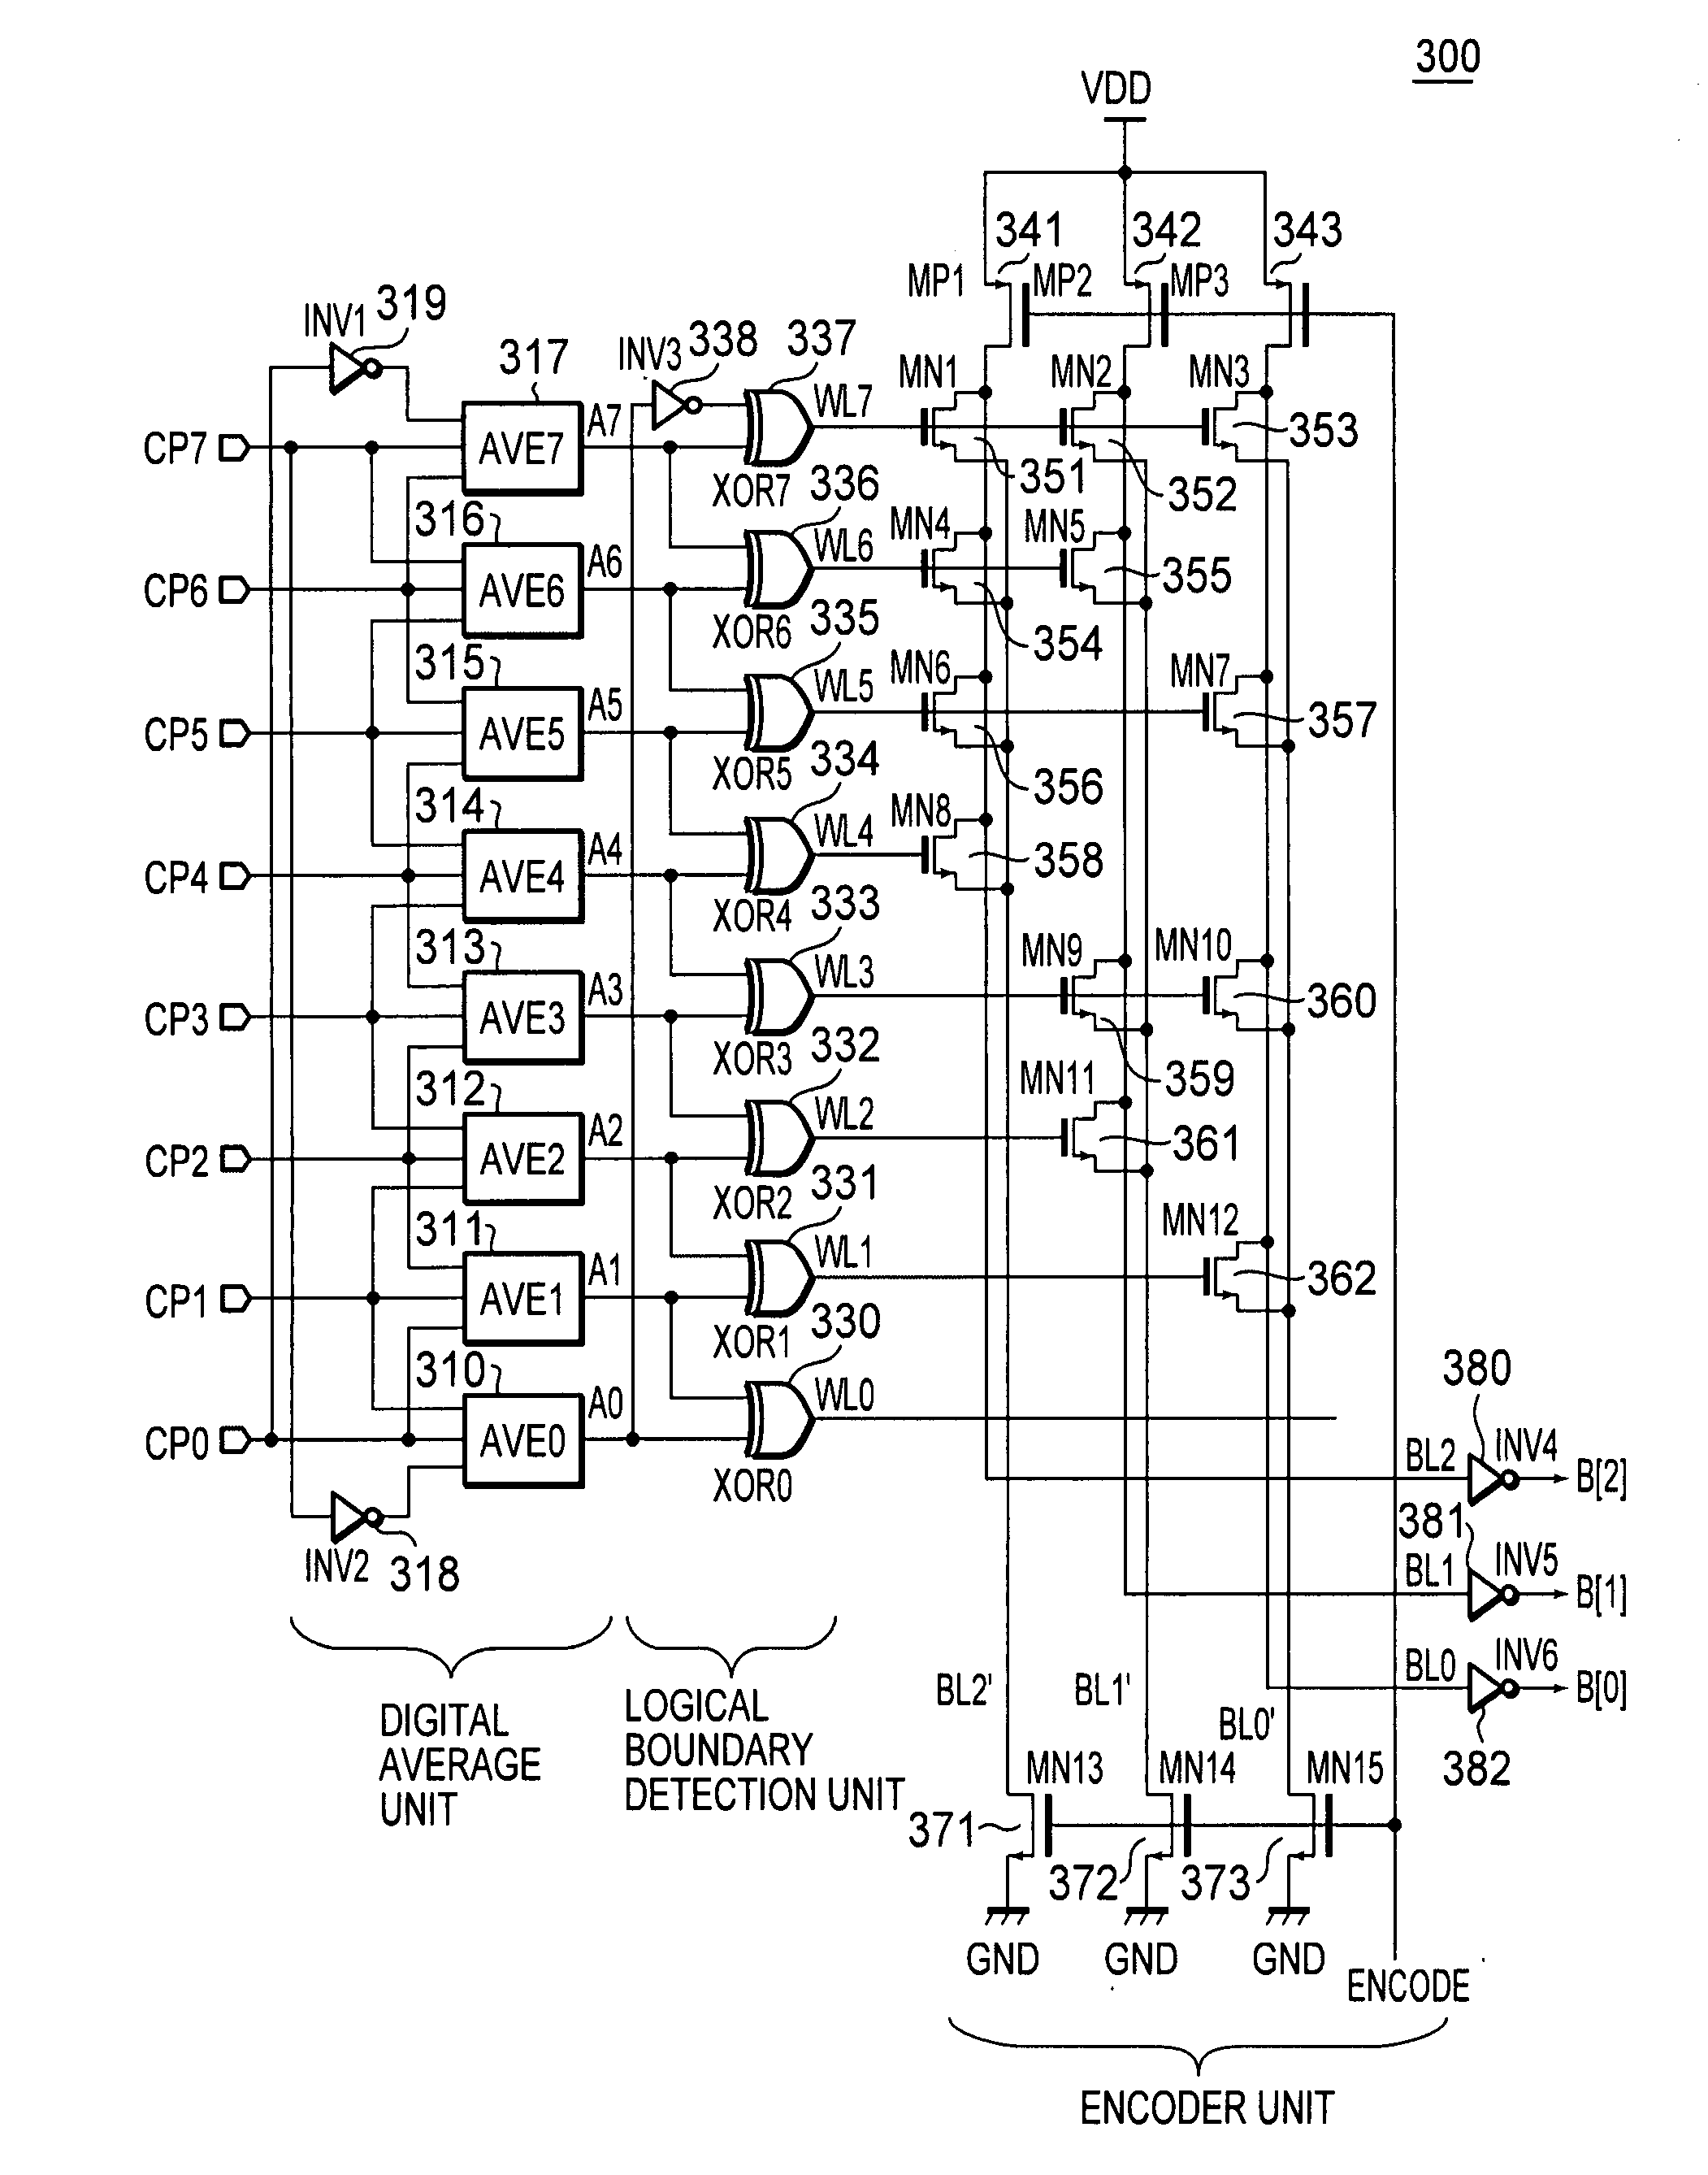 Encode circuit and analog-digital converter comprising a digital average unit and a logical boundary detection unit